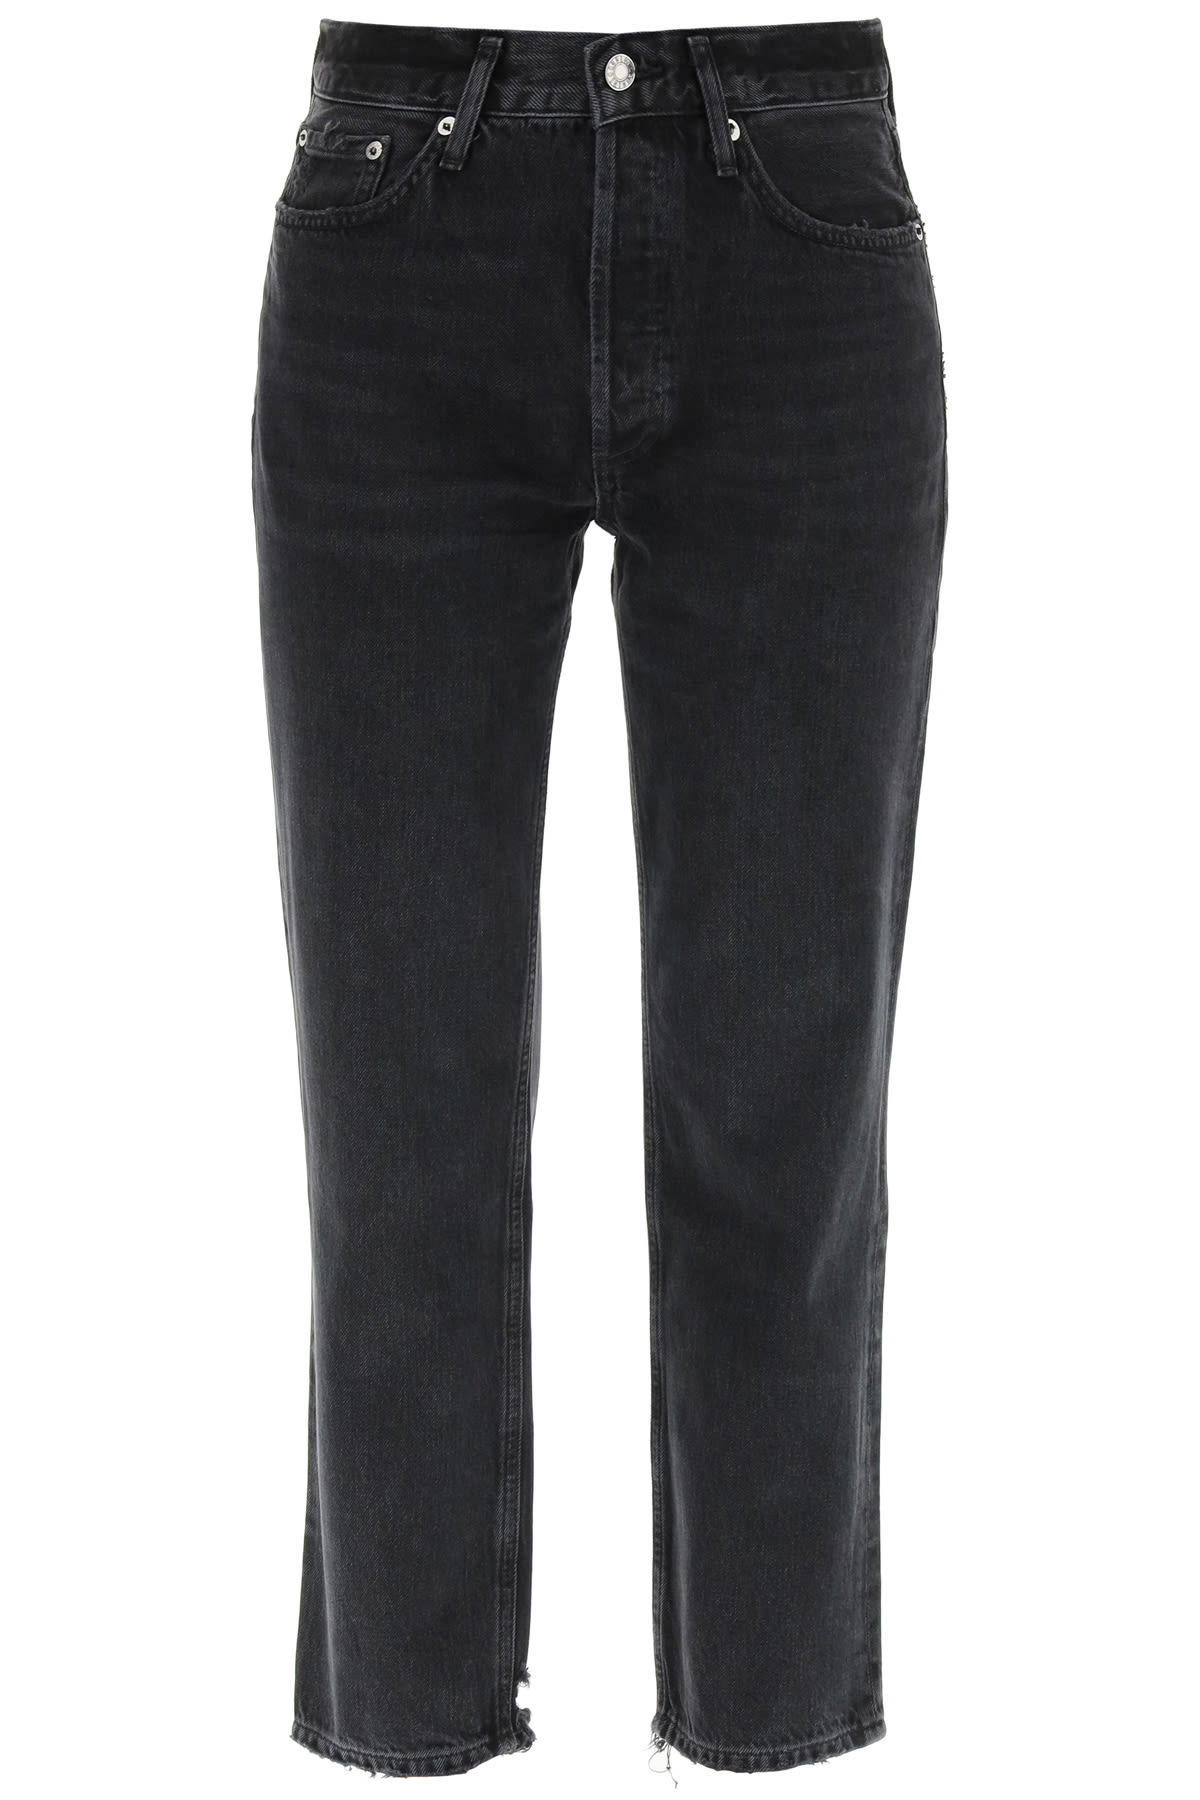 AGOLDE LANA CROPPED JEANS,A174 1157 RHYM